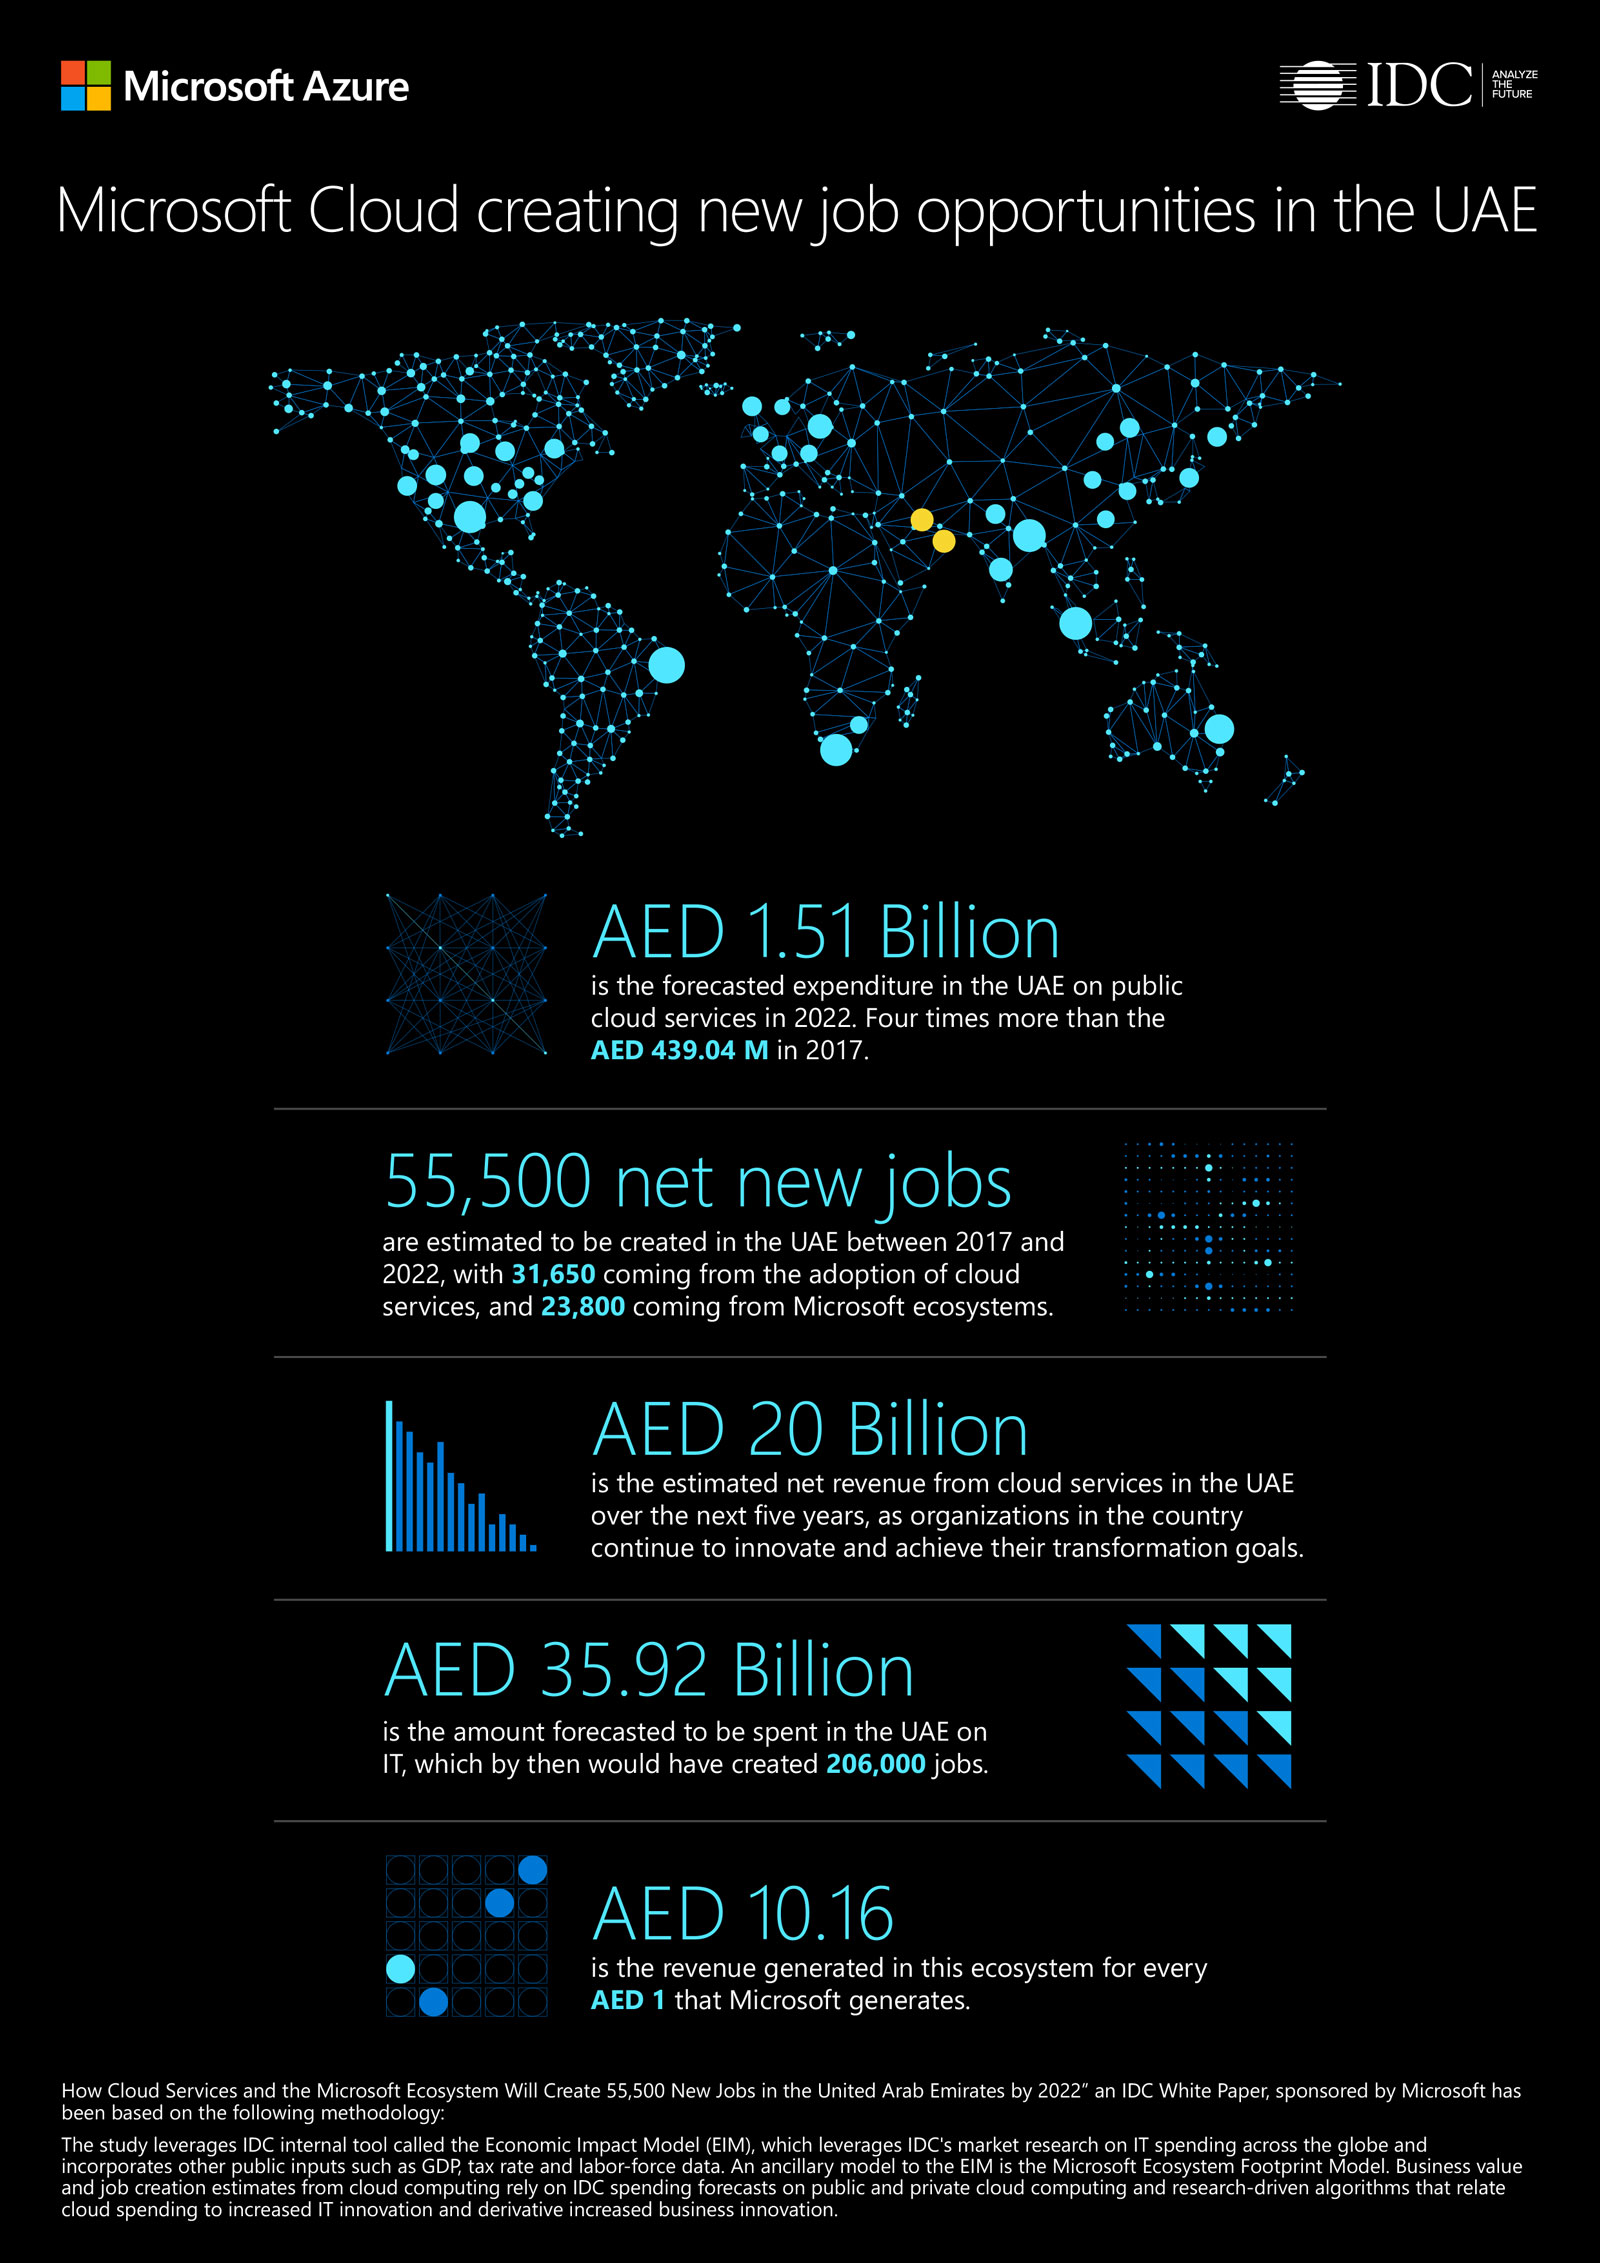 Infographic showing the creation of job opportunity by Microsoft